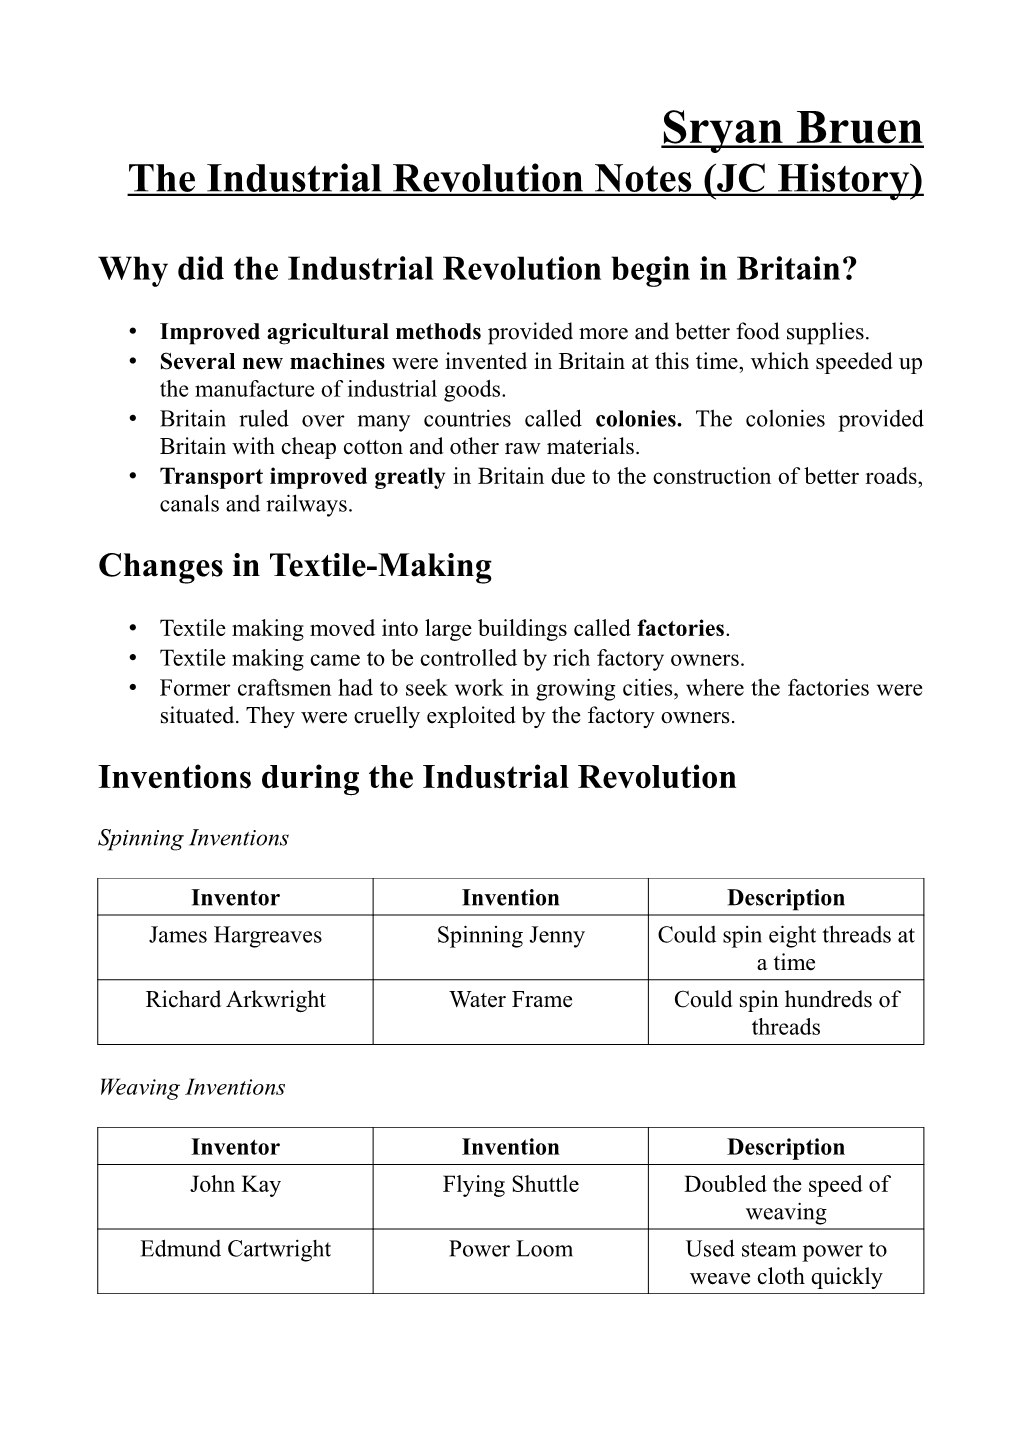 The Industrial Revolution Notes (JC History)